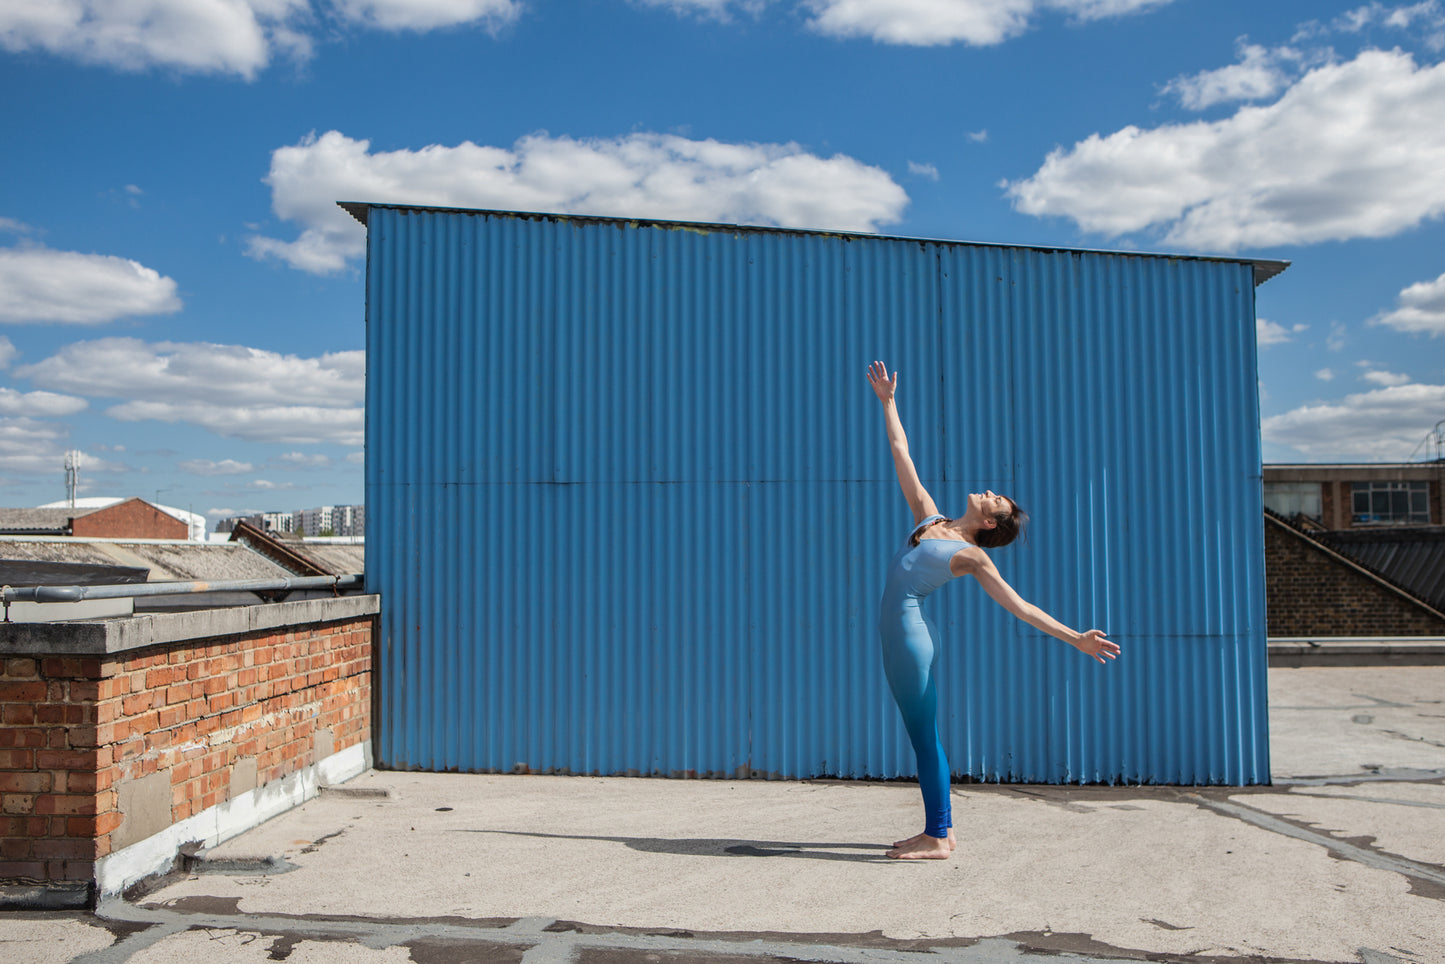 Dancers on Rooftops: "Rachel Burn (#1)" - Exhibition Display Discounted Print (UK Delivery / London Pick-Up Only, DoR-EDDP-GSB)